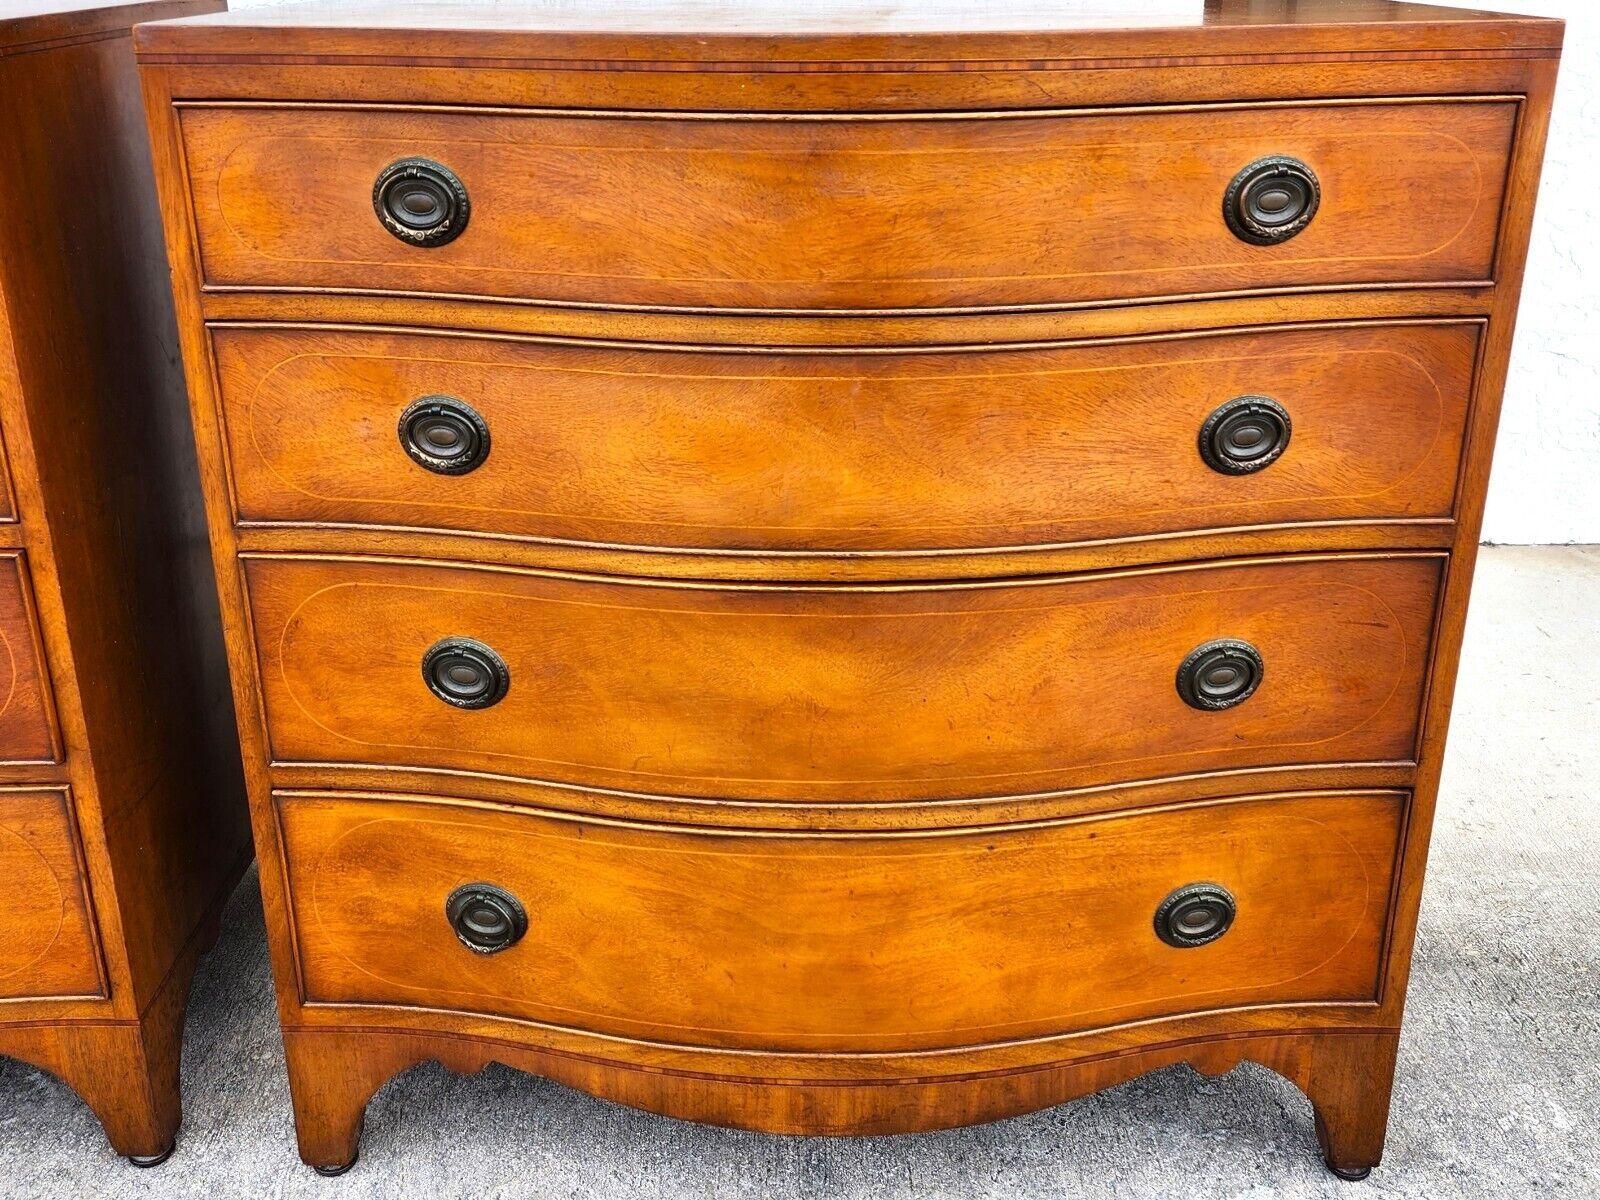 For FULL item description click on CONTINUE READING at the bottom of this page.

Offering One Of Our Recent Palm Beach Estate Fine Furniture Acquisitions Of A
Pair of MCM 1950s Serpentine Mahogany Bachelor Chests by OLD COLONY
With Satin Wood inlay